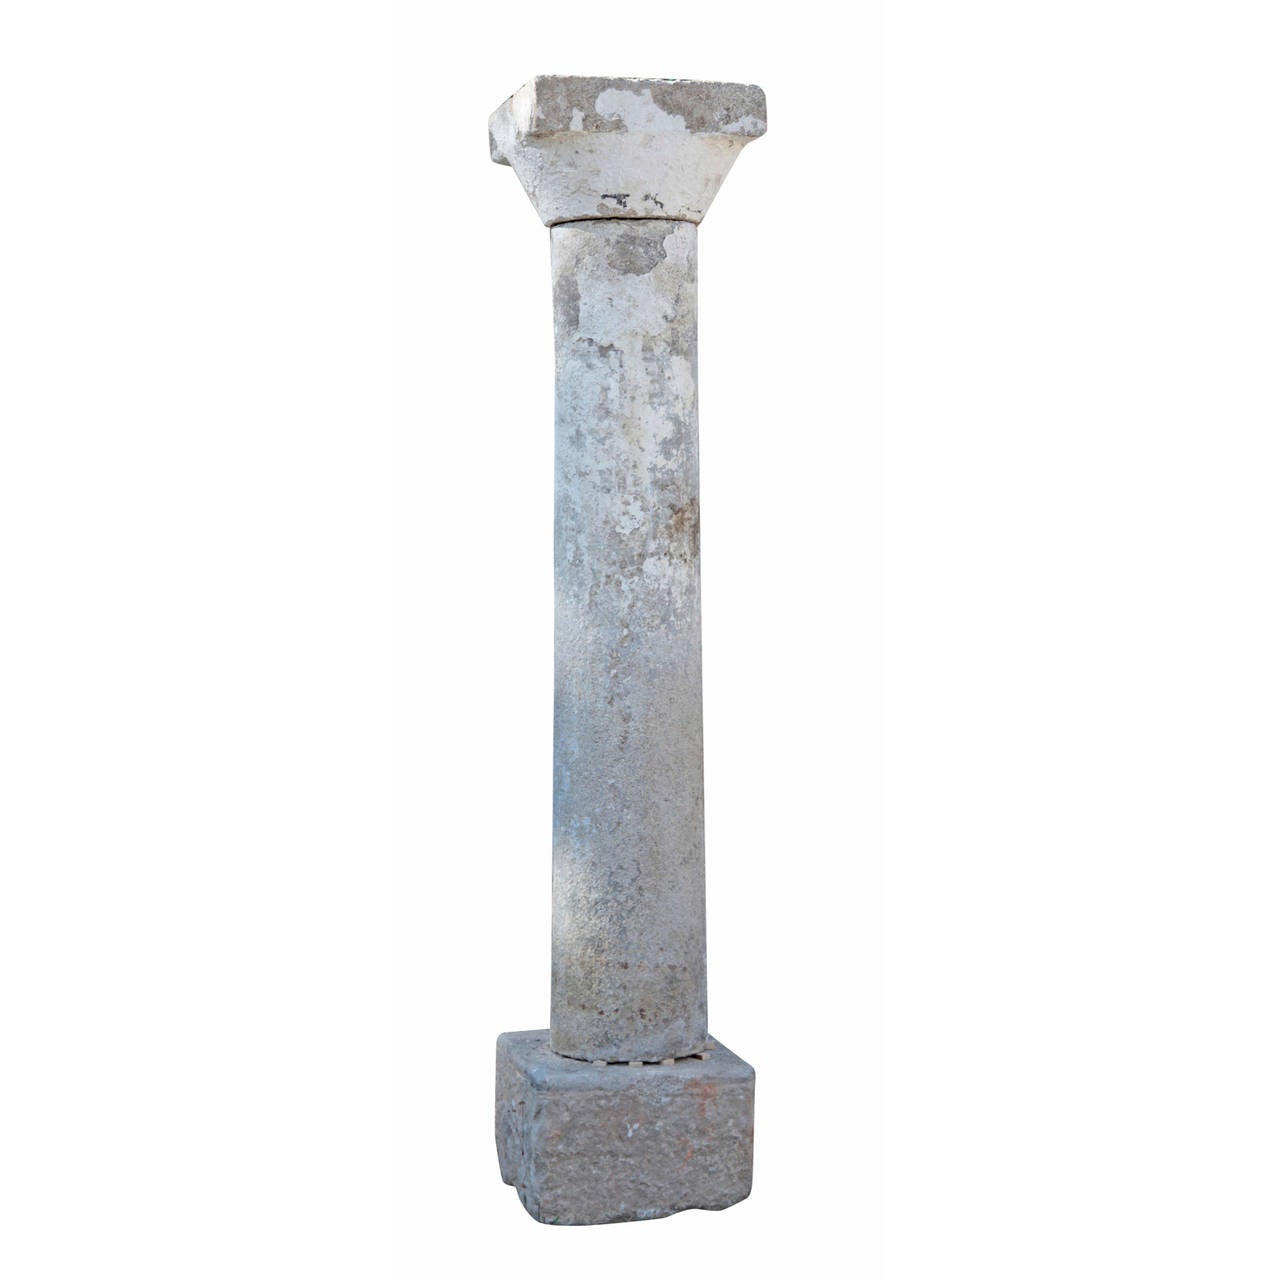 Set of Six Granite Columns, with old paint residues, from the 18th Century, from East Europe. Each has a cuboid base, a smooth shaft and a simple capital.